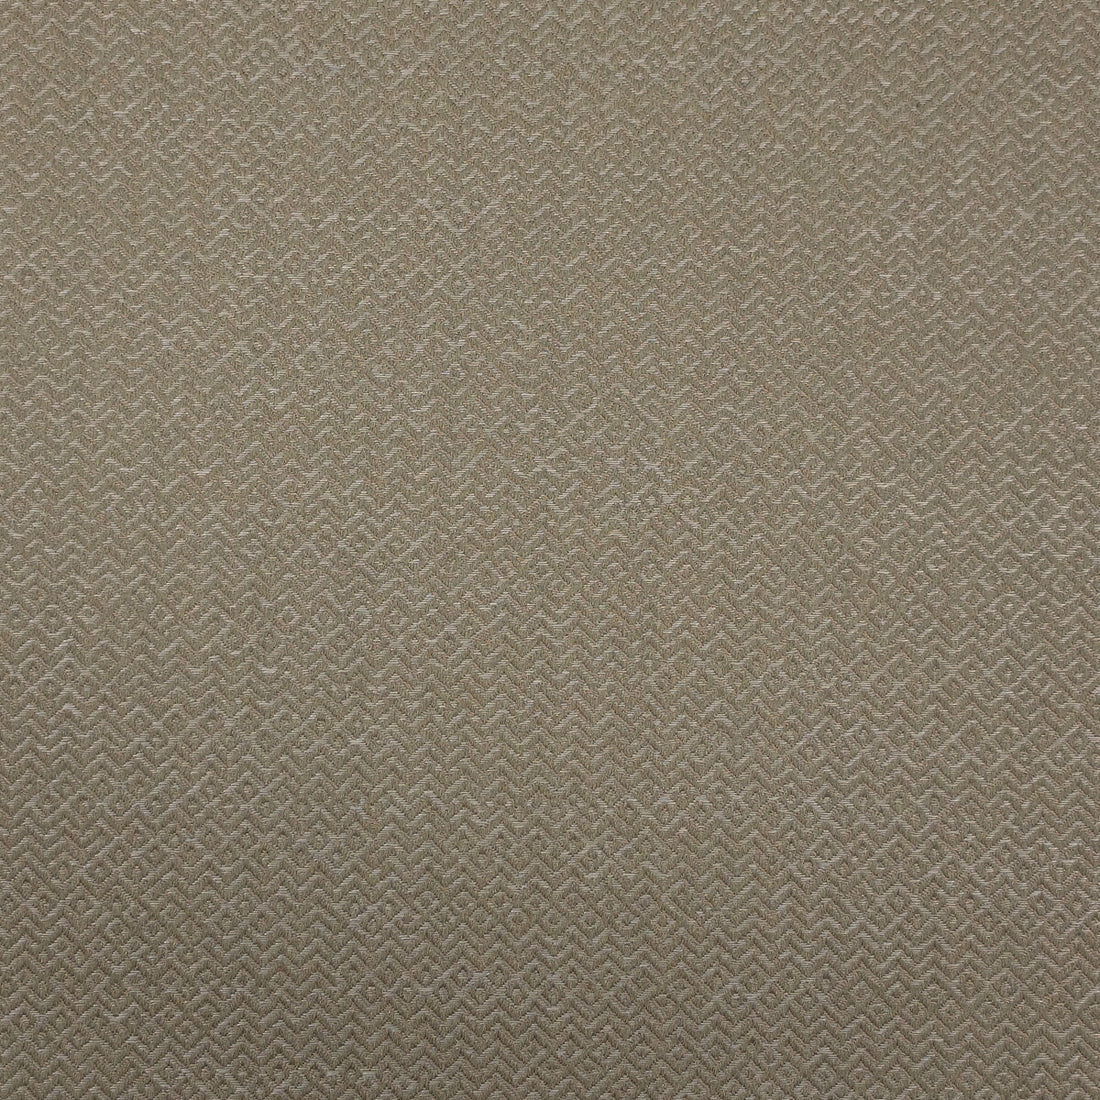 Kf Des fabric - pattern LZ-30203.16.0 - by Kravet Design in the Lizzo collection